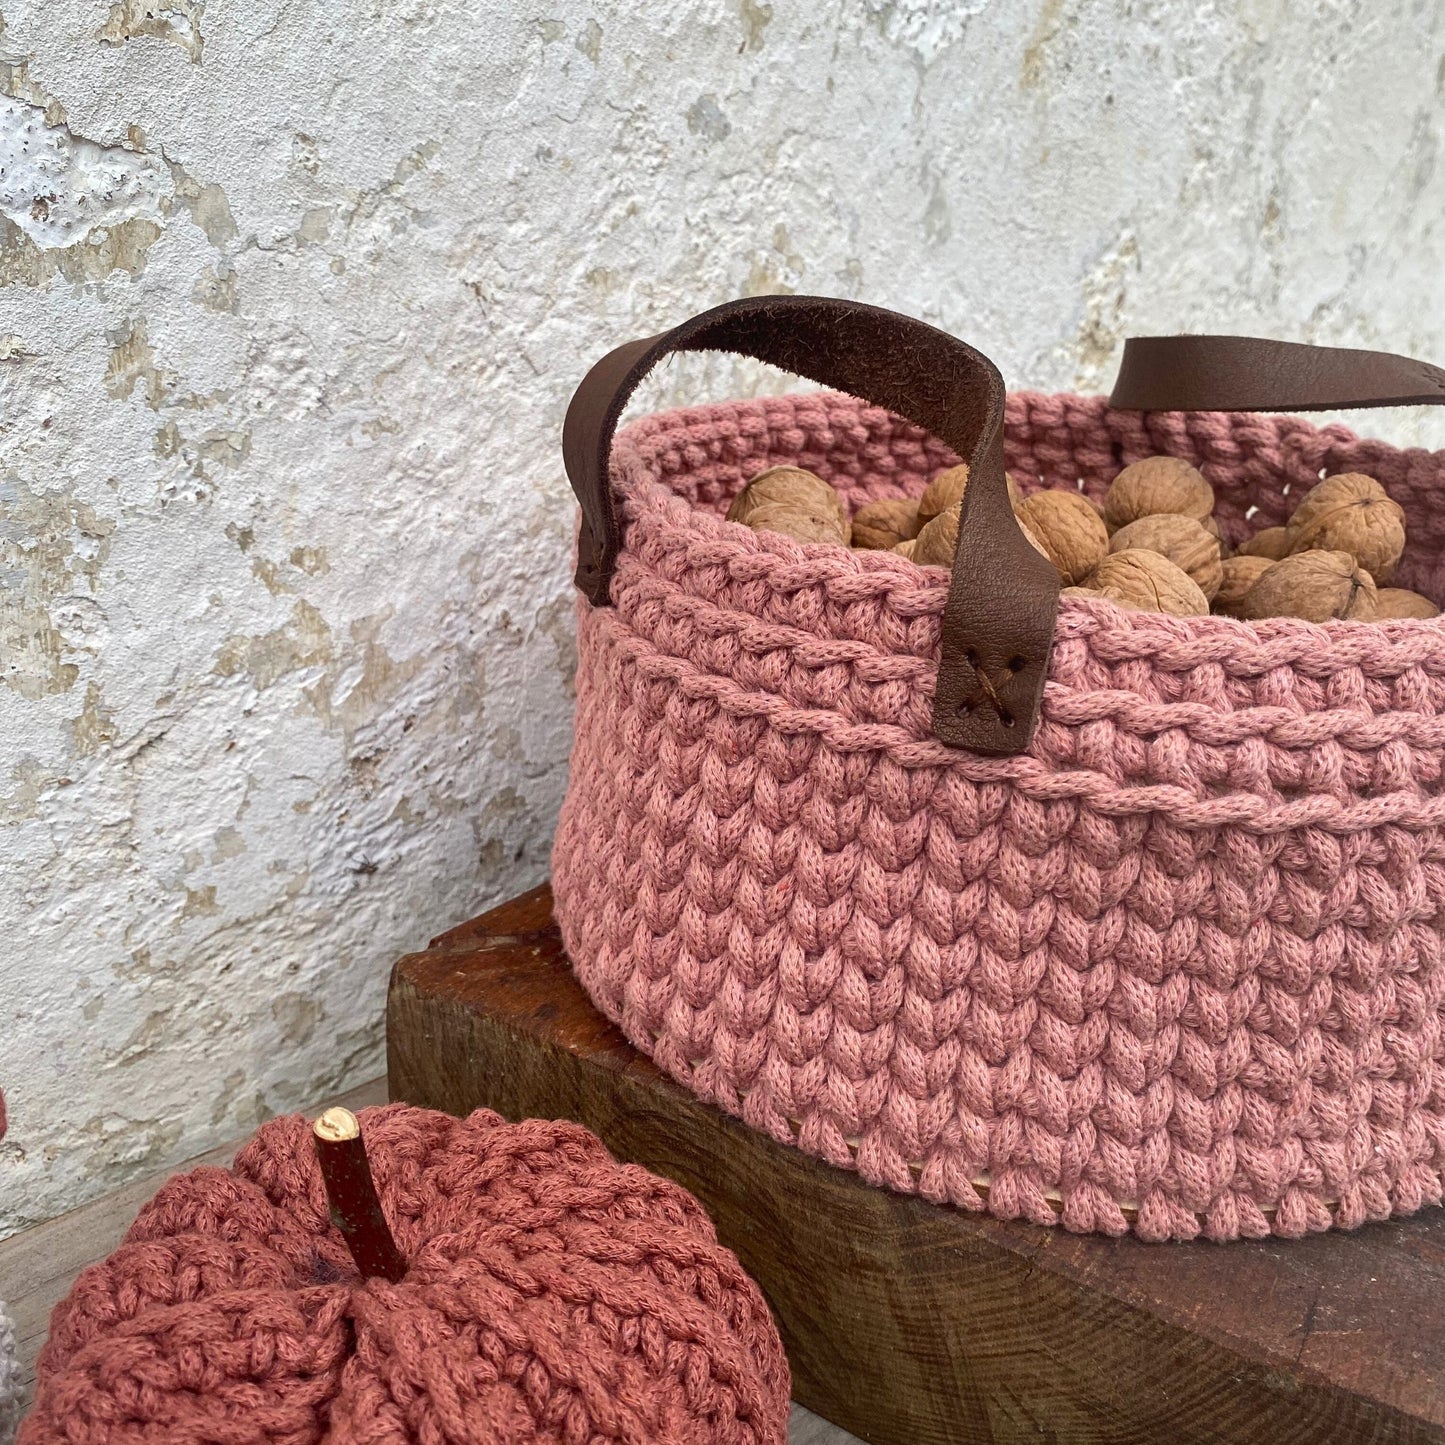 Vintage Pink Crochet Basket with Leather Handles - Recycled Pink Basket